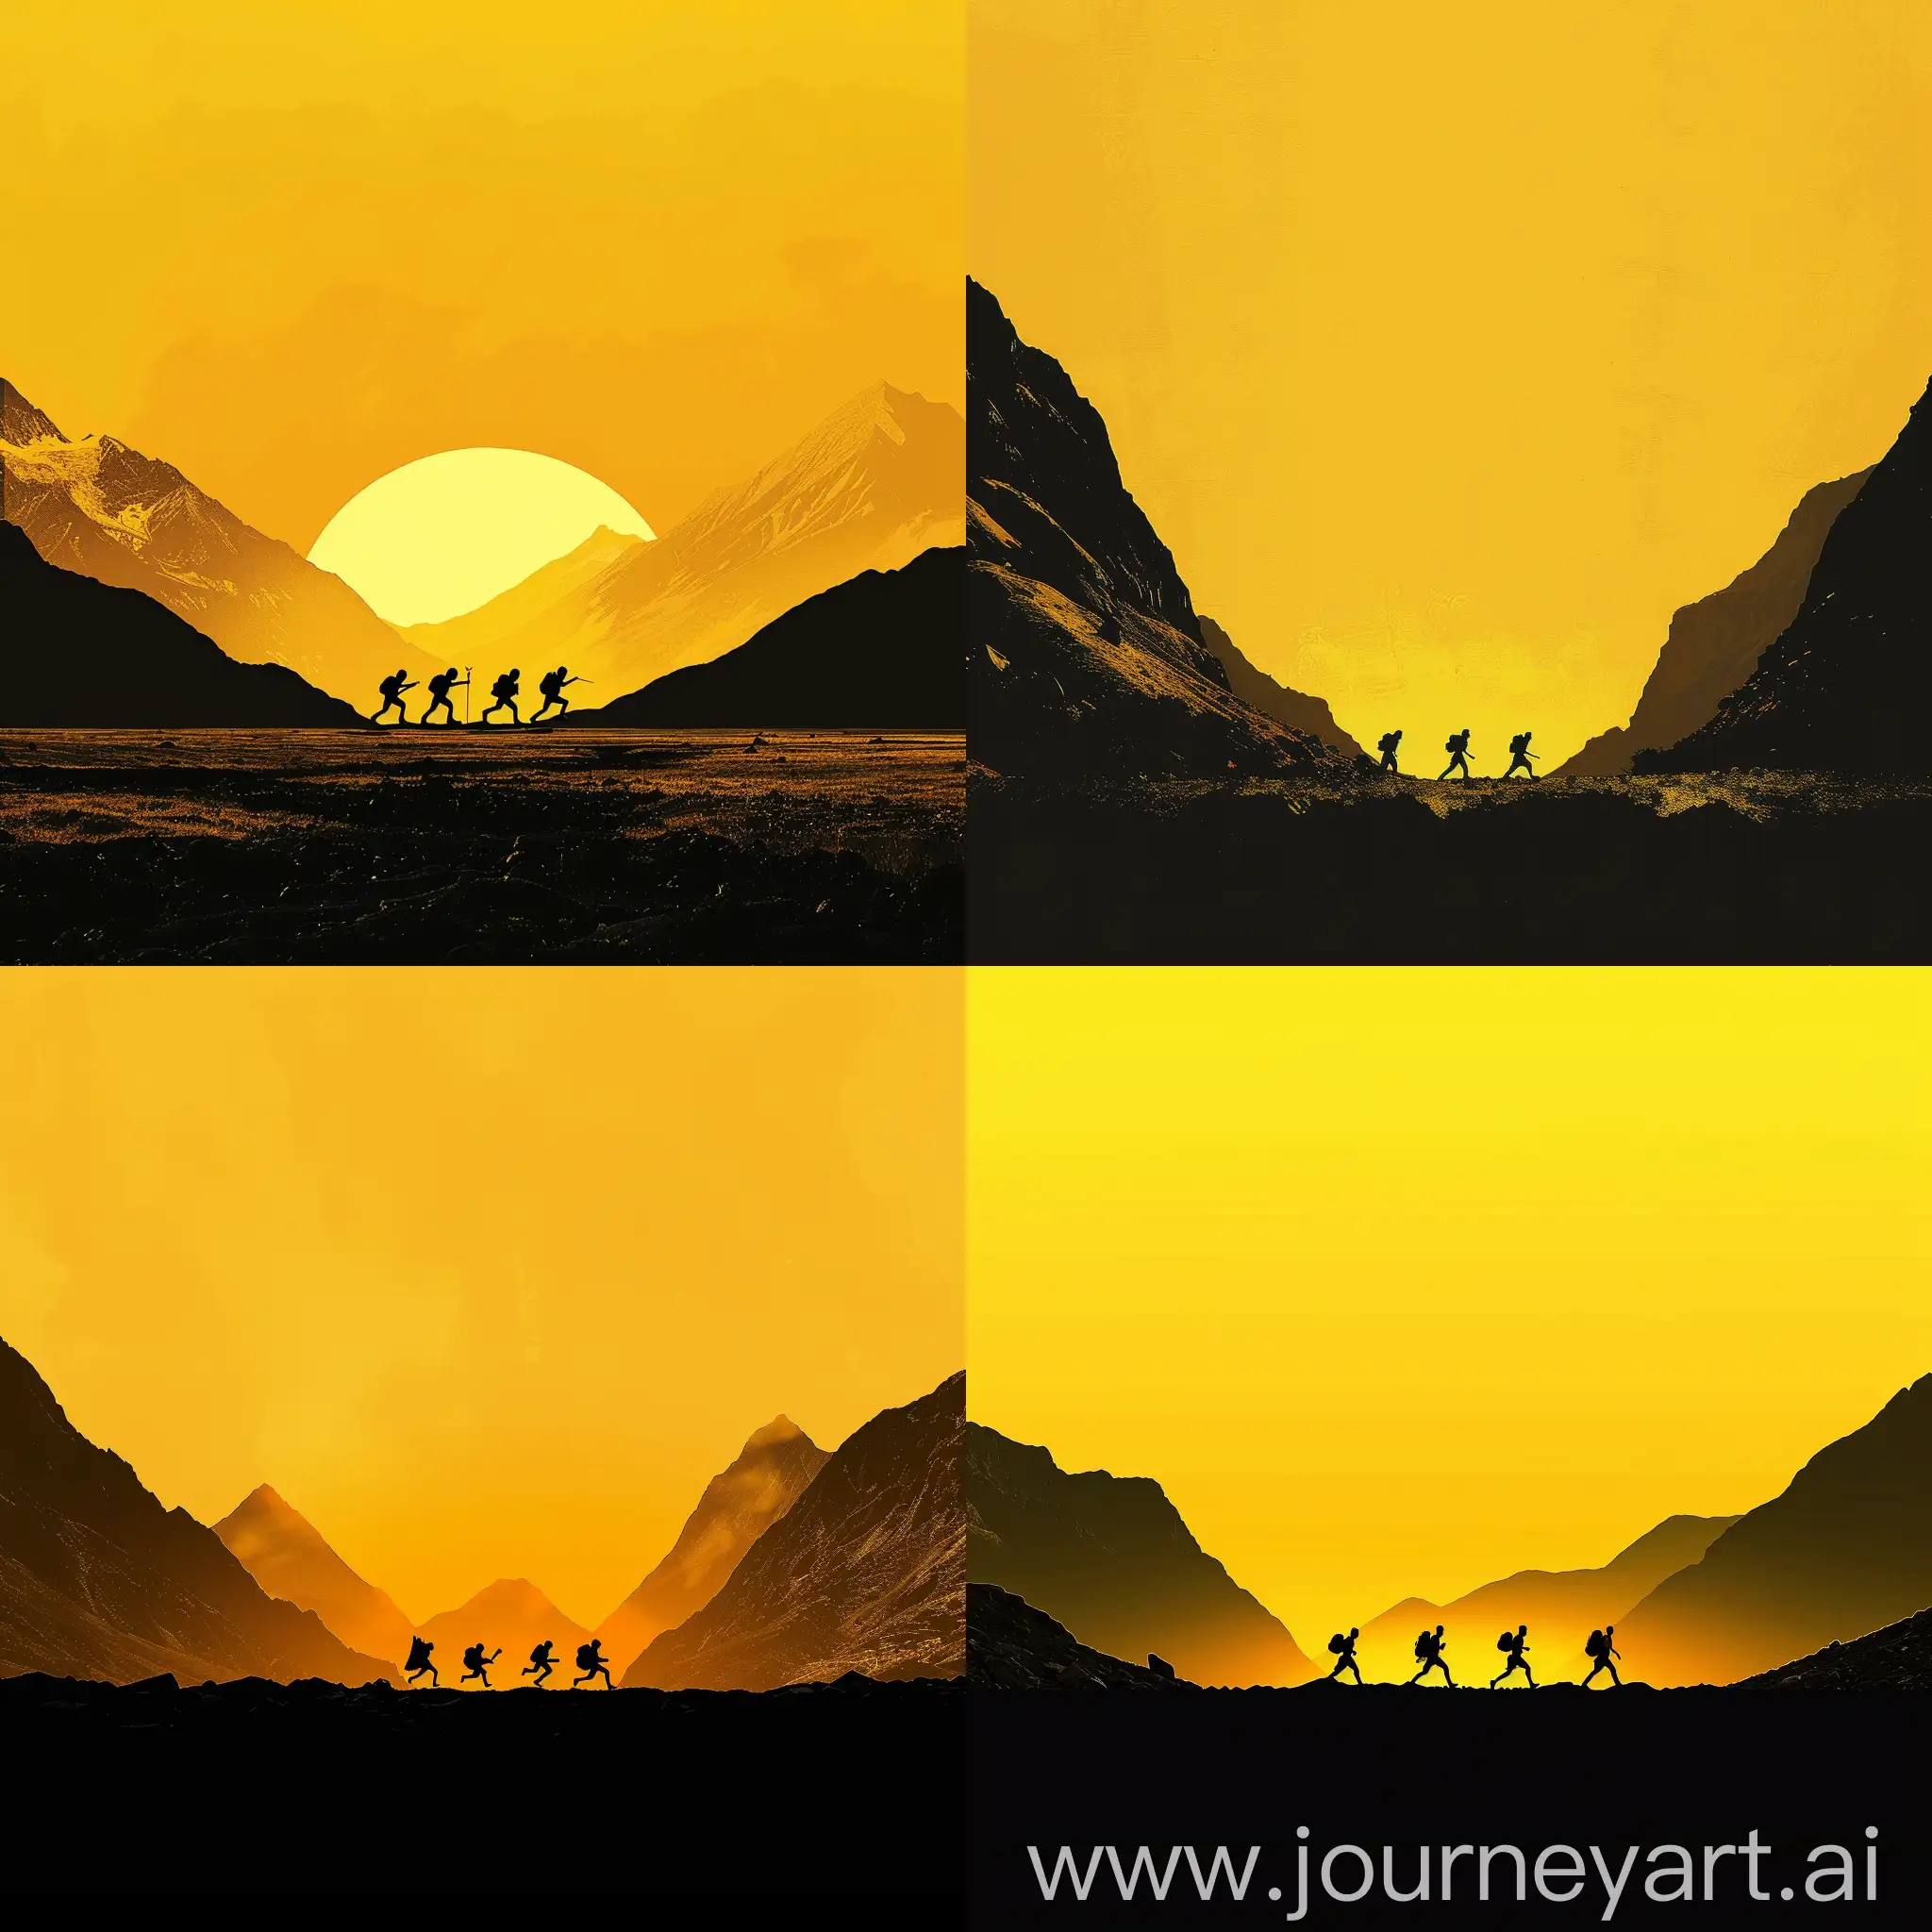 Fantasy-Travelers-at-Dusk-Silhouette-Adventure-Amidst-Majestic-Mountains